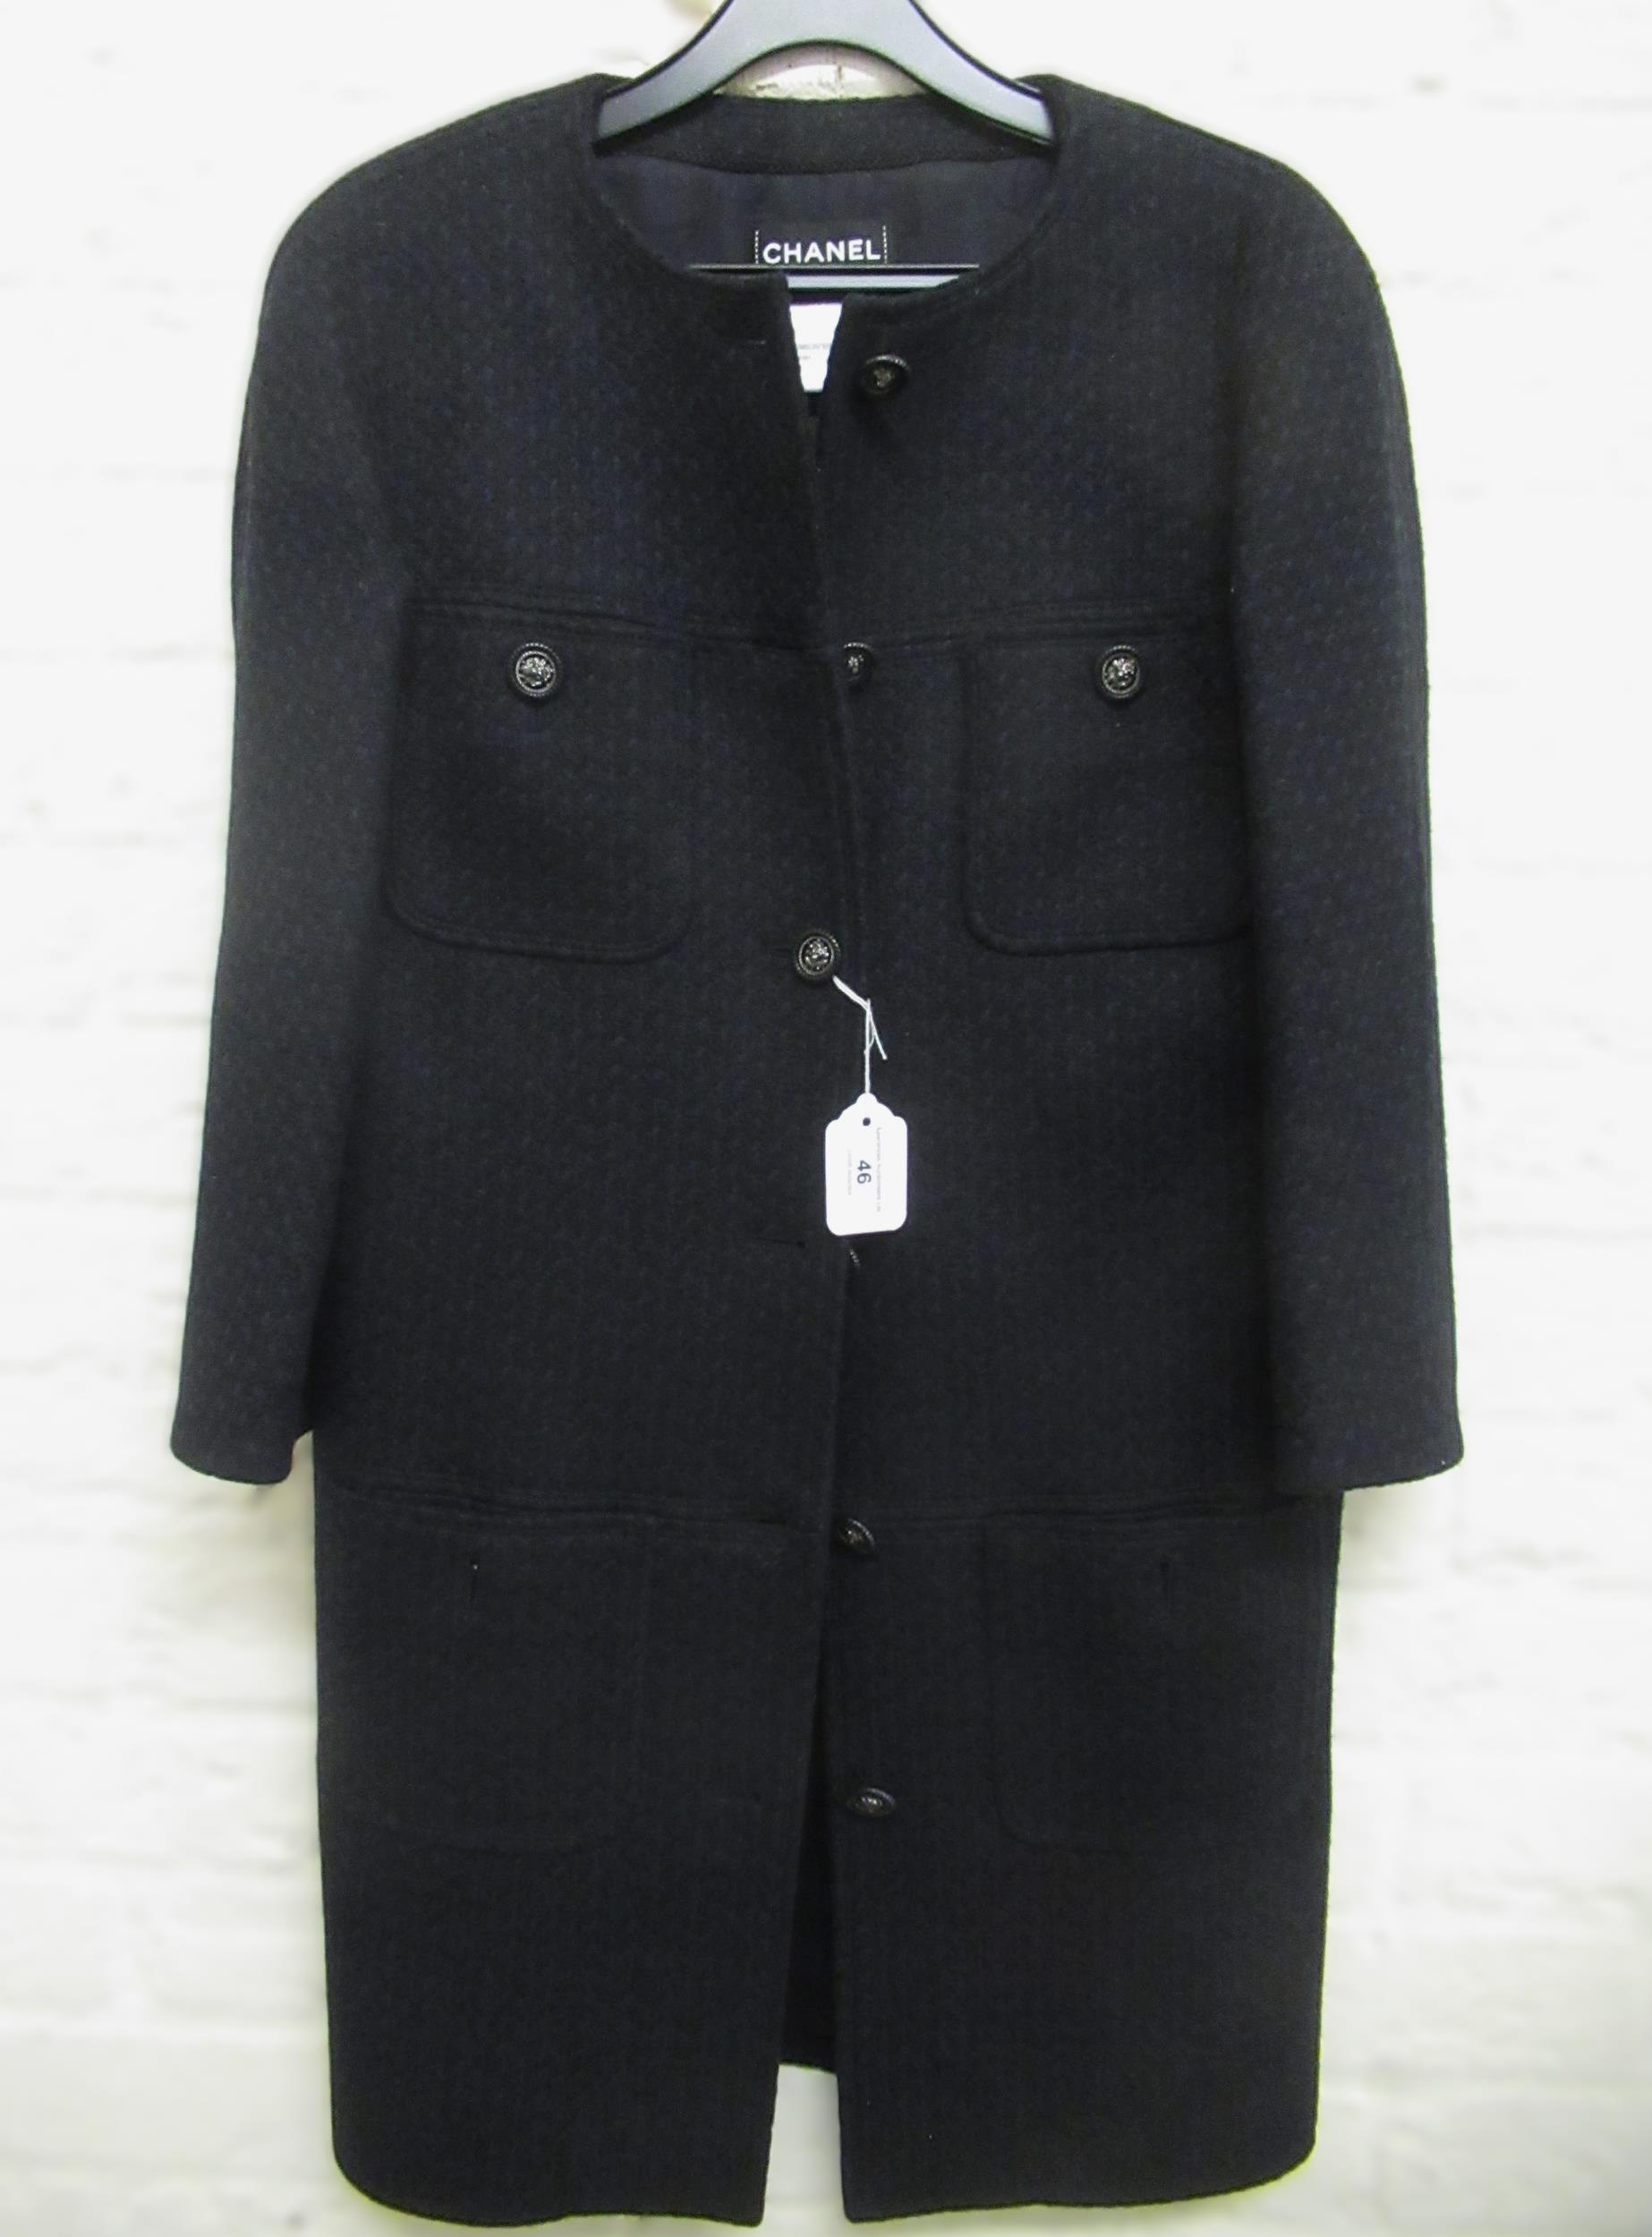 Chanel, ladies classic coat with three quarter length sleeves, size 38 Serial No. P49853v32761 In